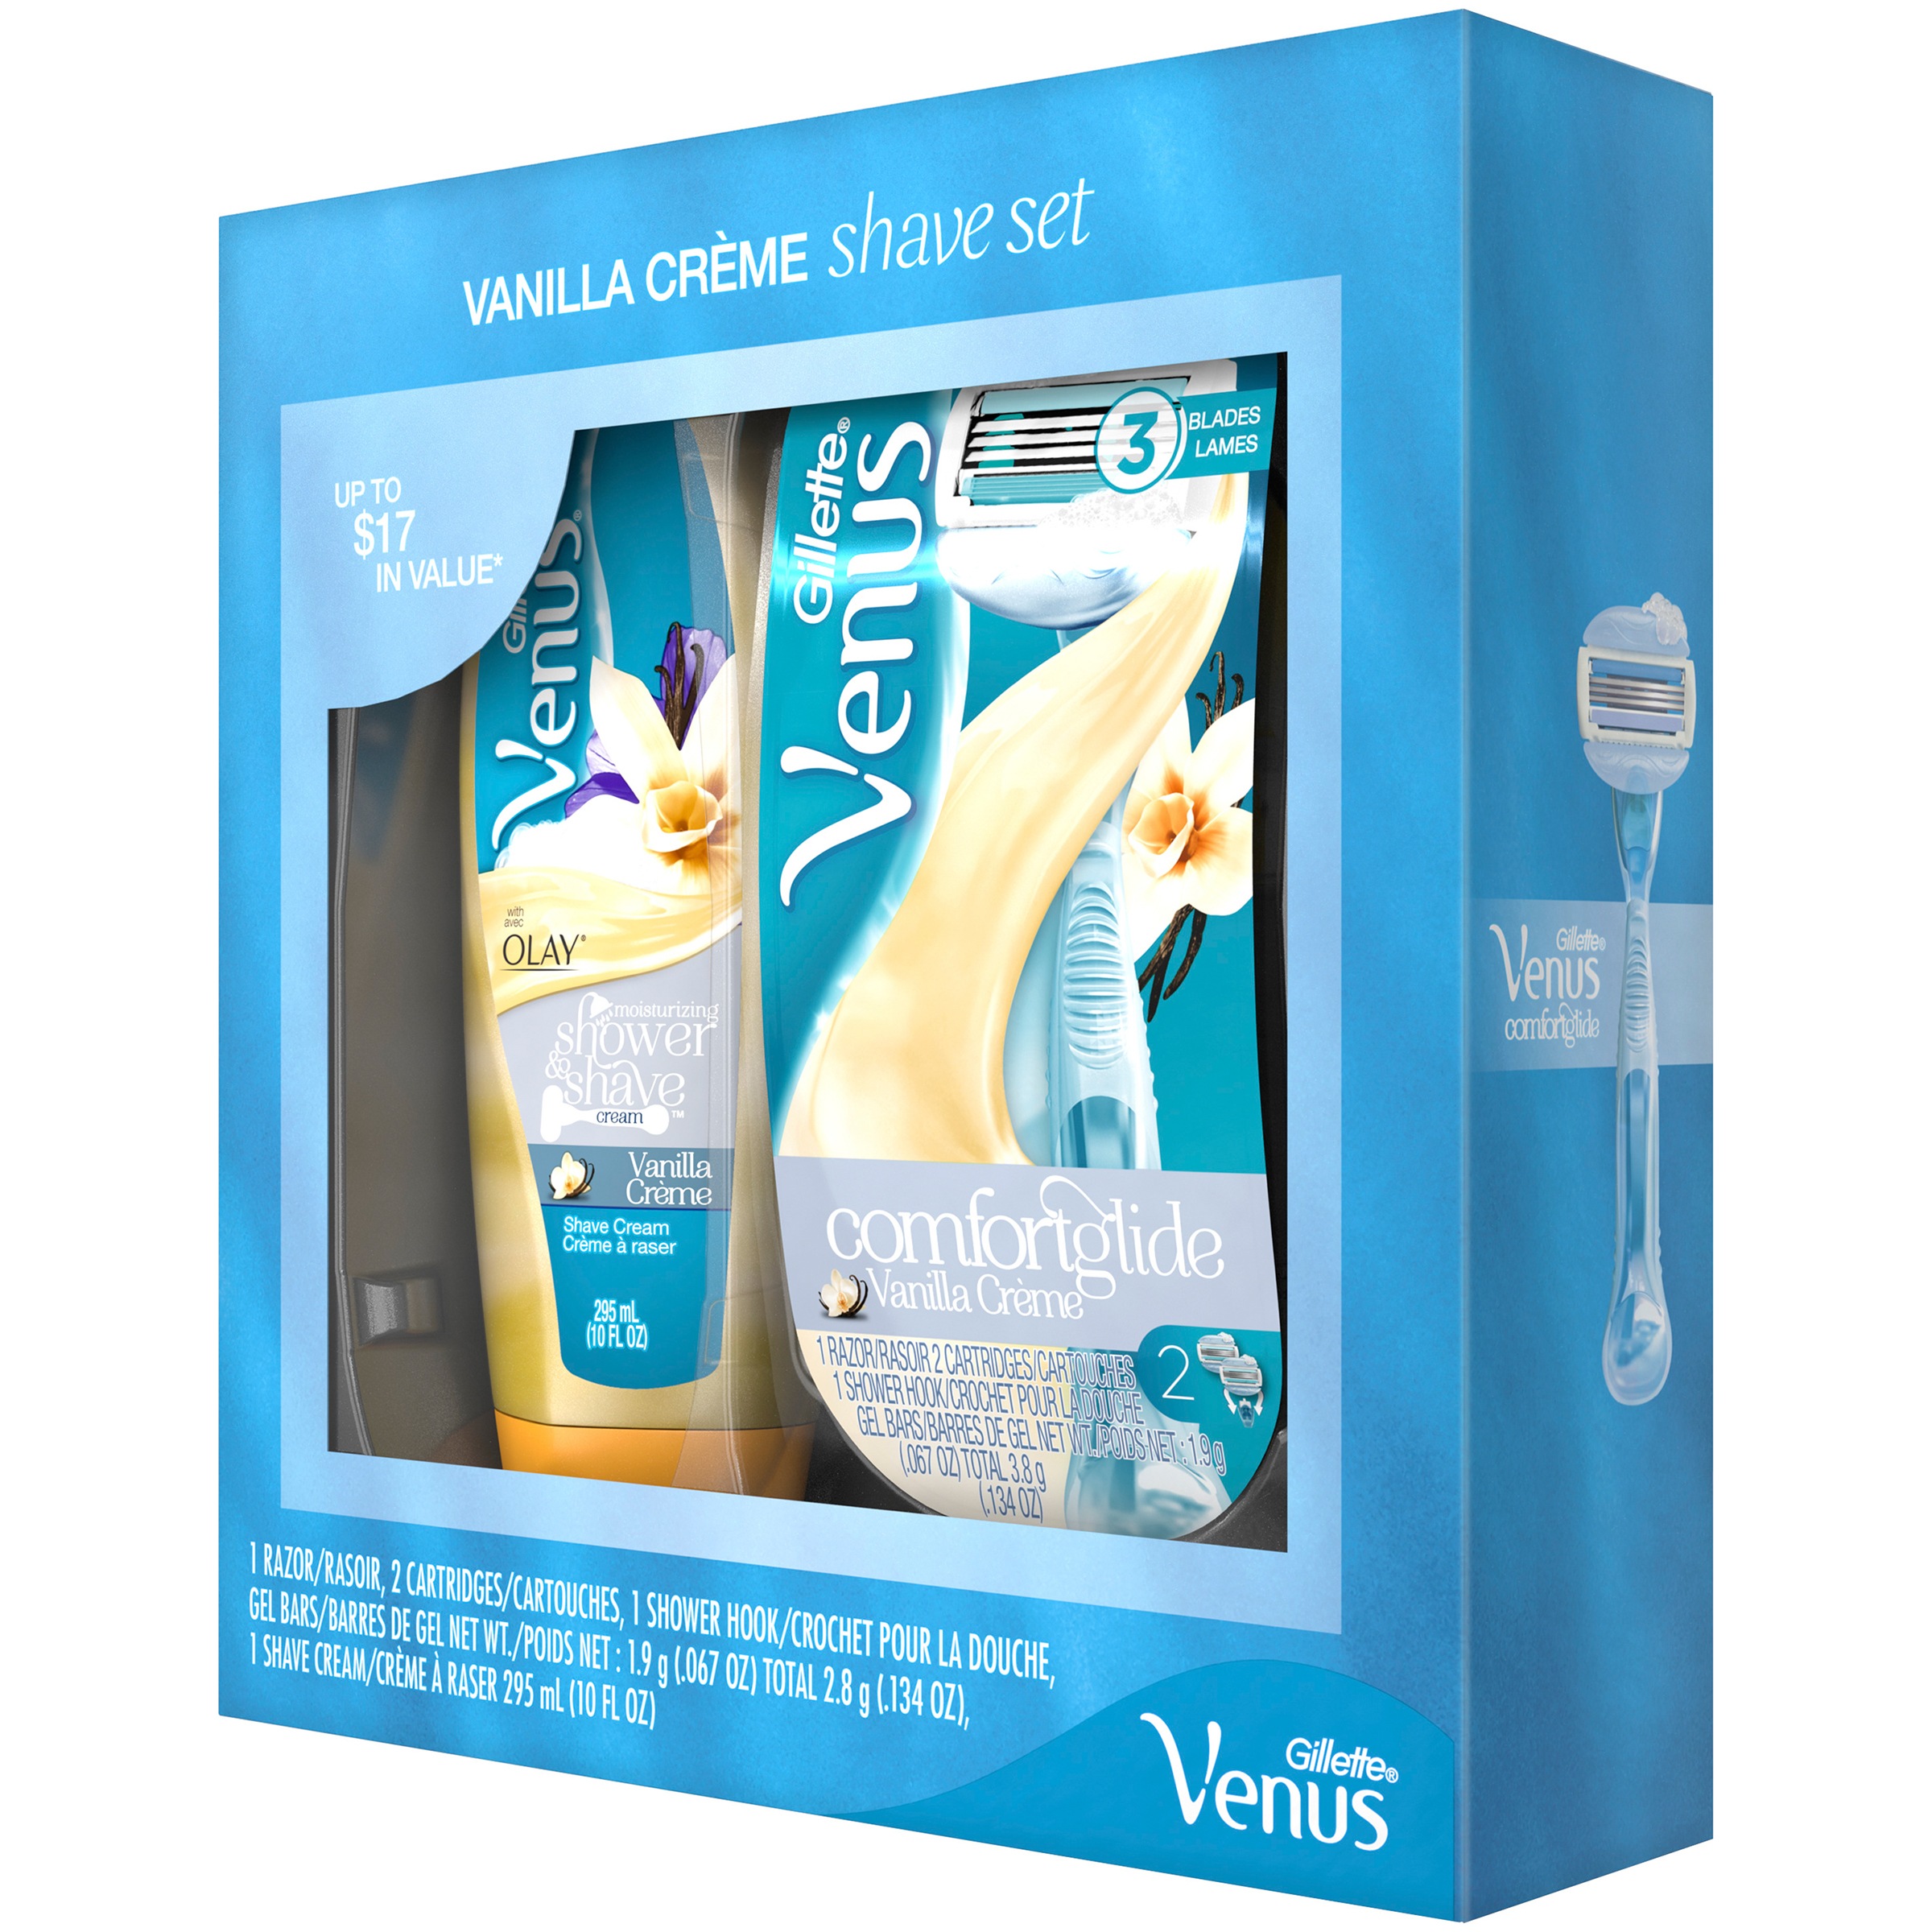 Gillette Venus and Olay Vanilla Crme Female Shave Gift Set - image 3 of 3